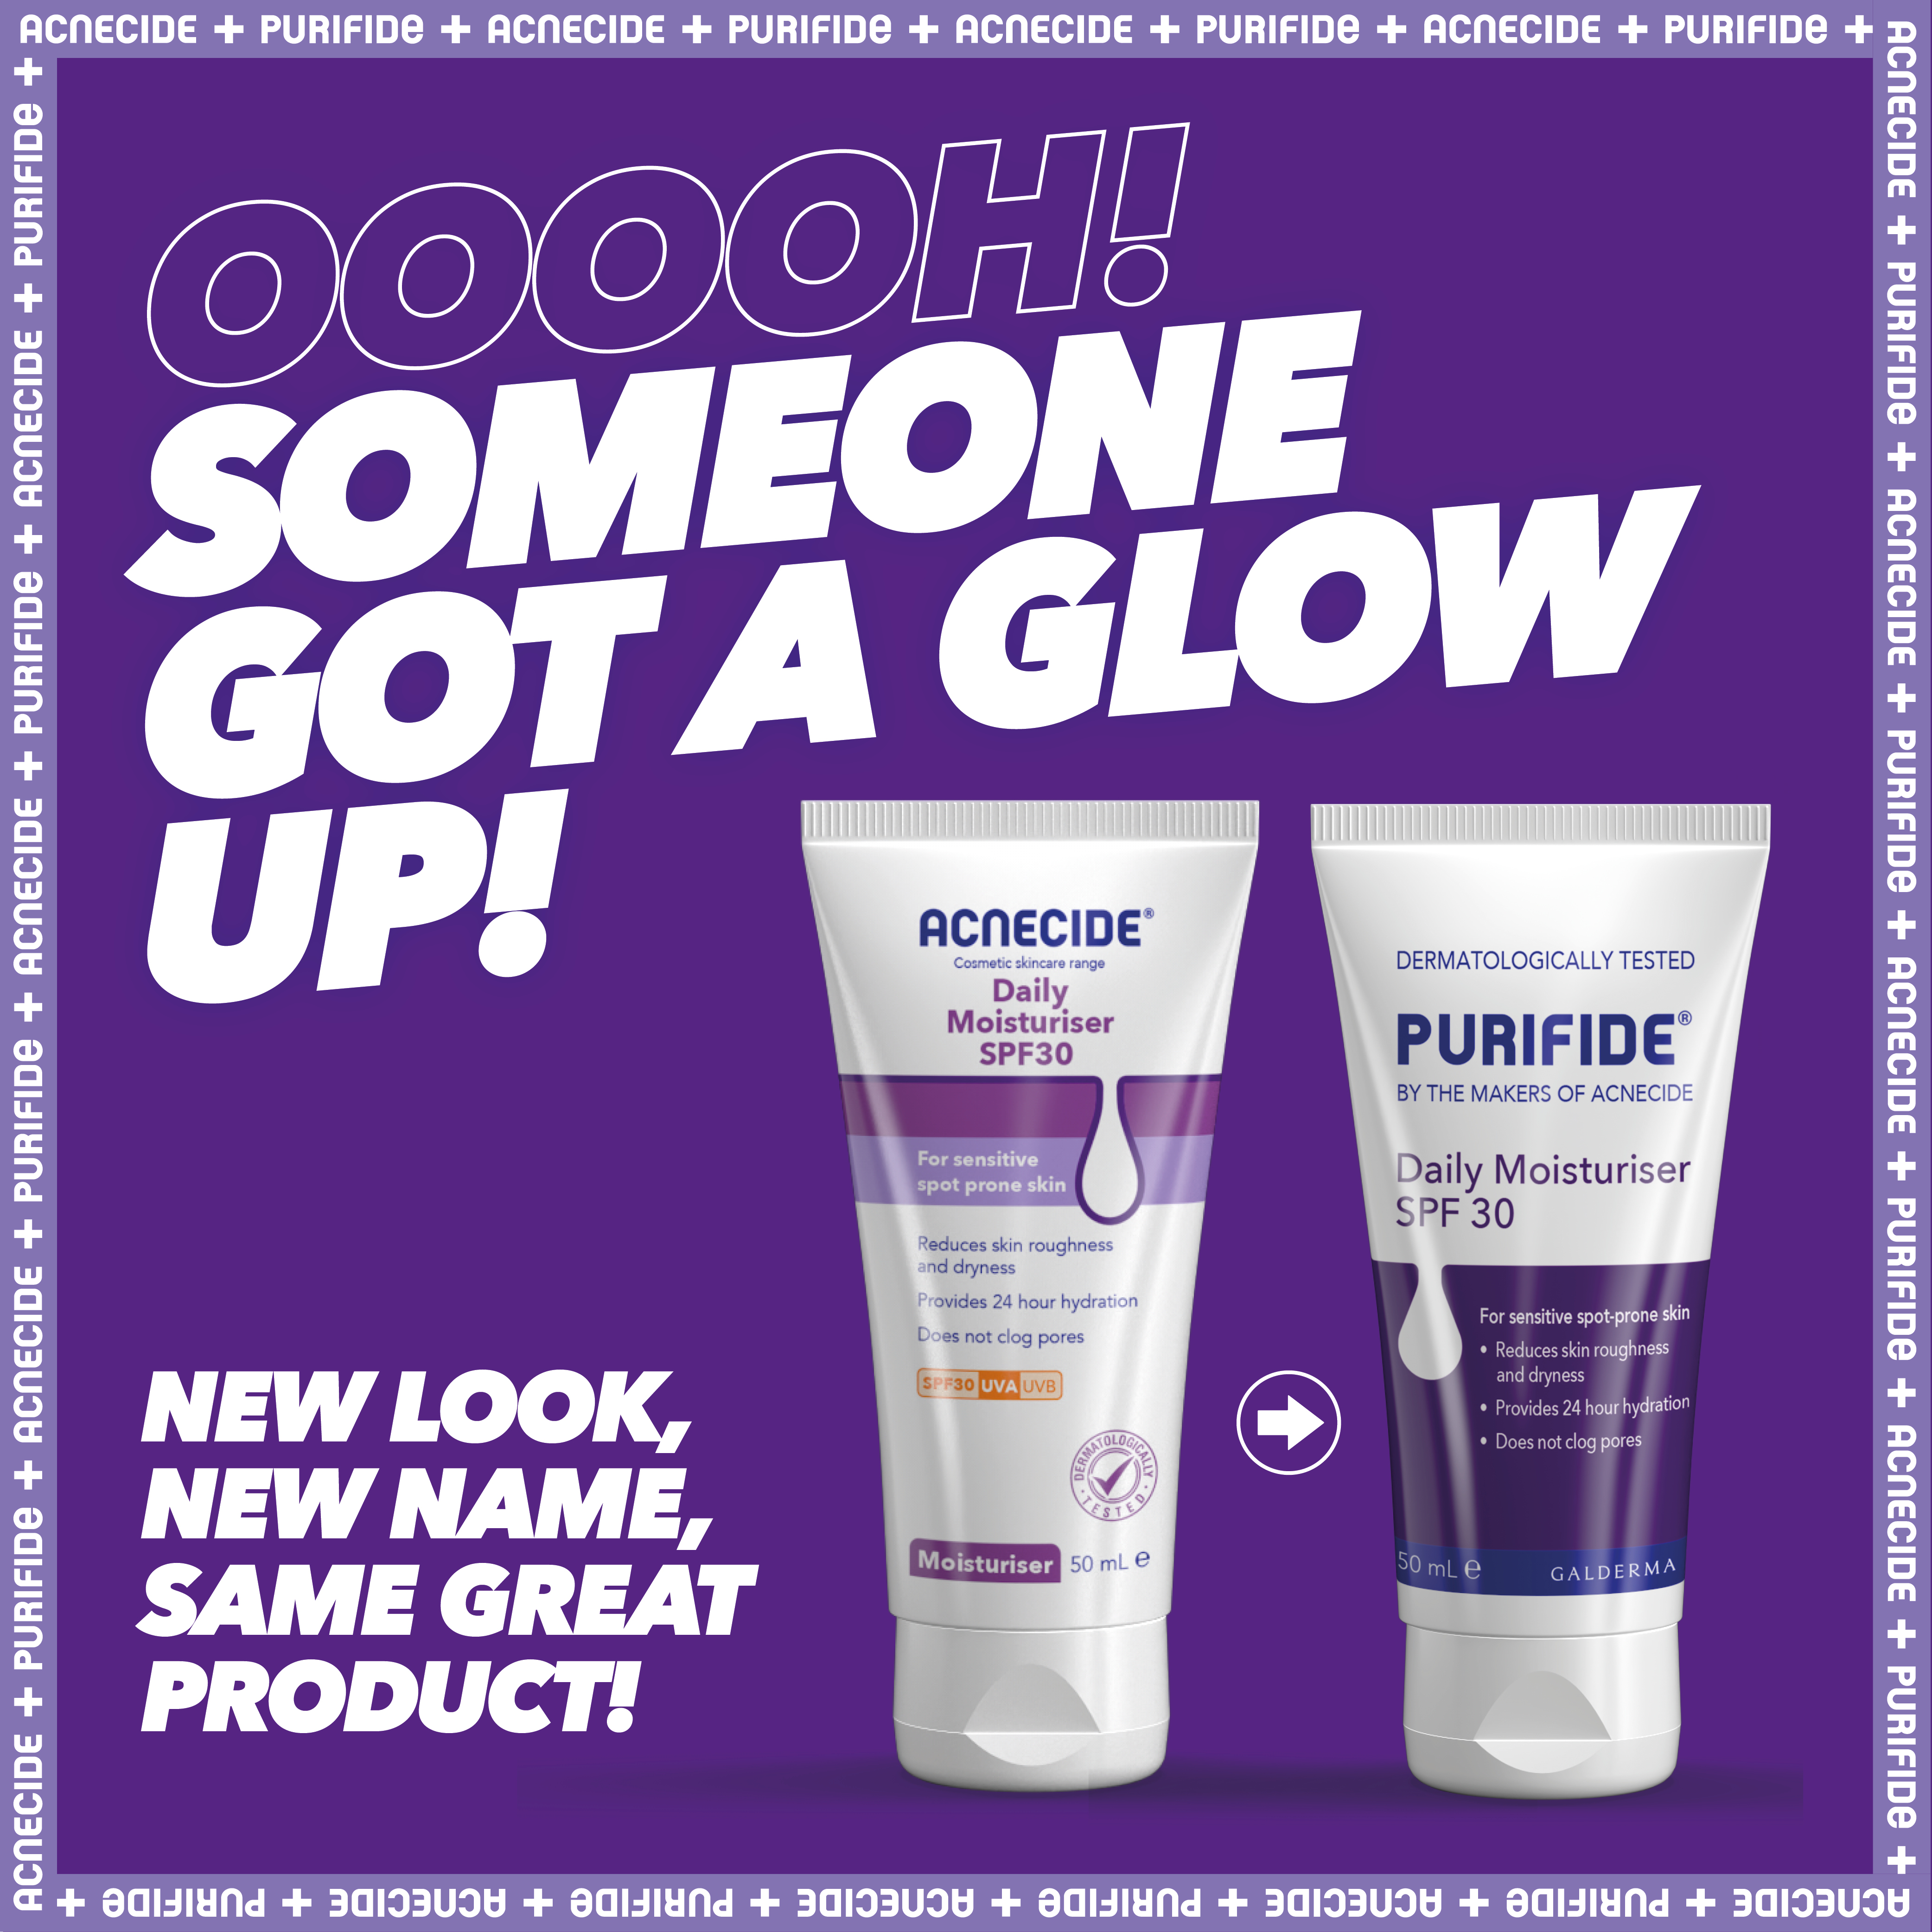 OOOOH! Someone got a glow up!New look,new name,same great product!